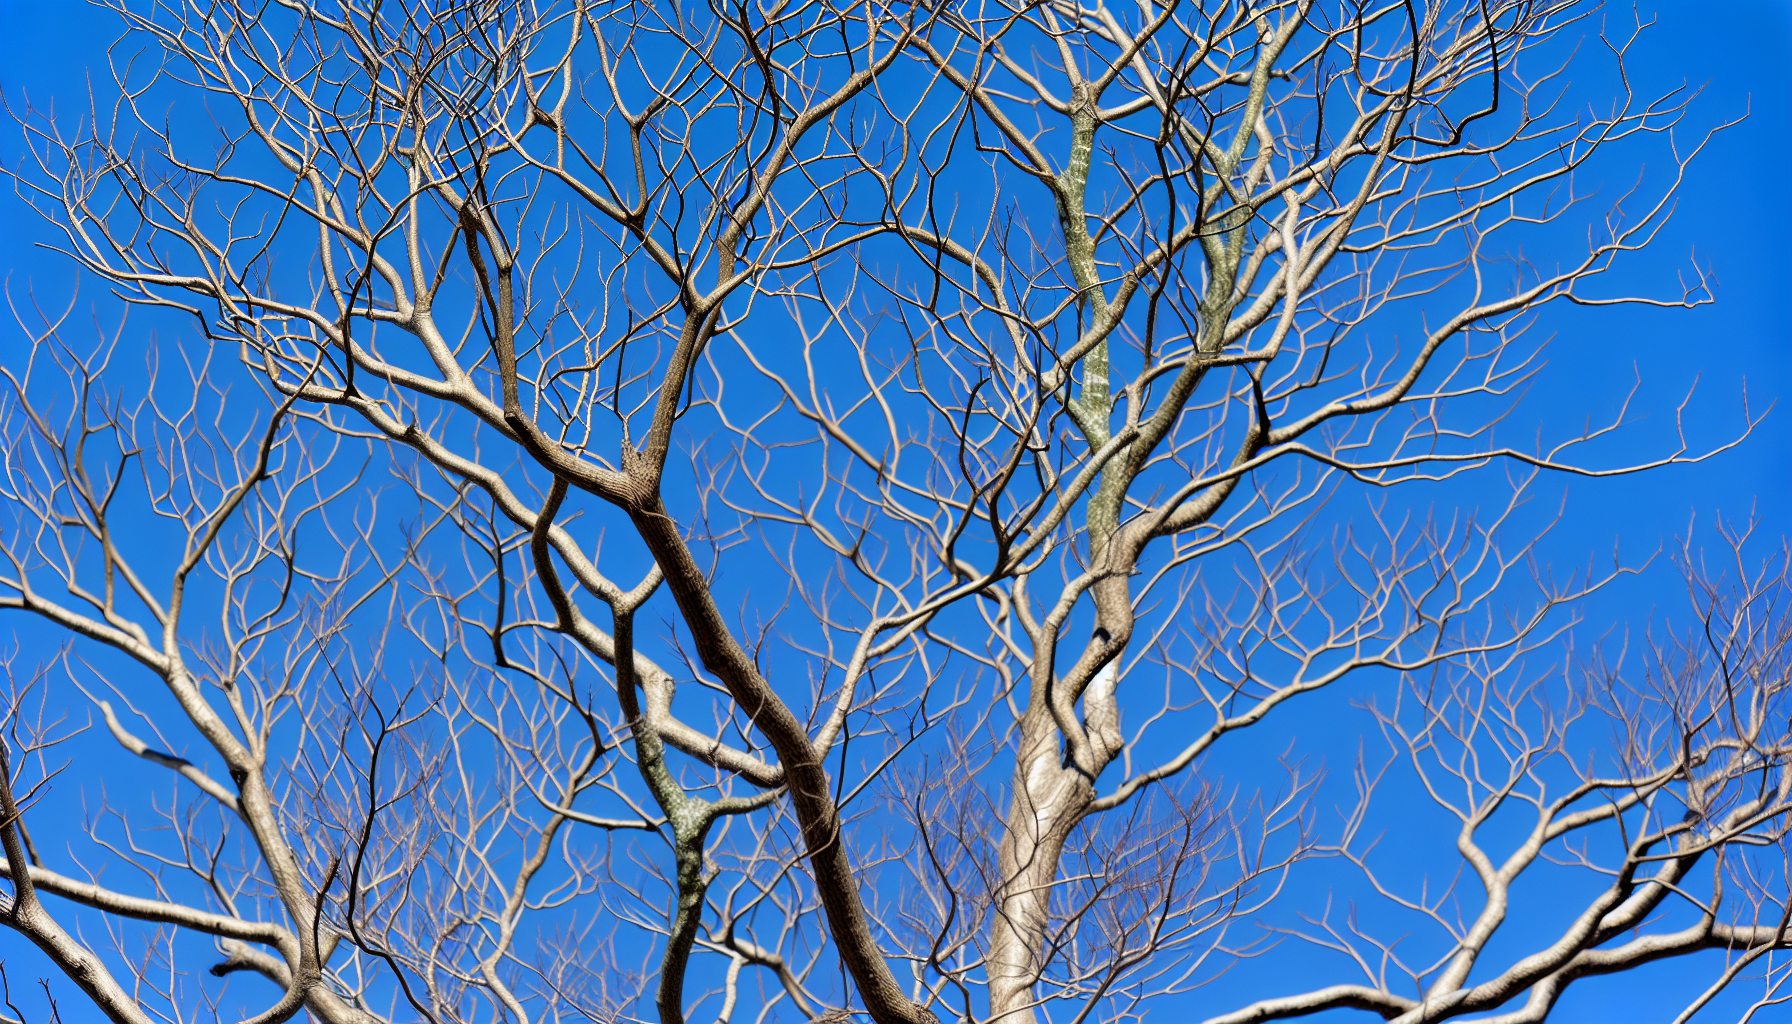 Close-up of bare branches with no green foliage